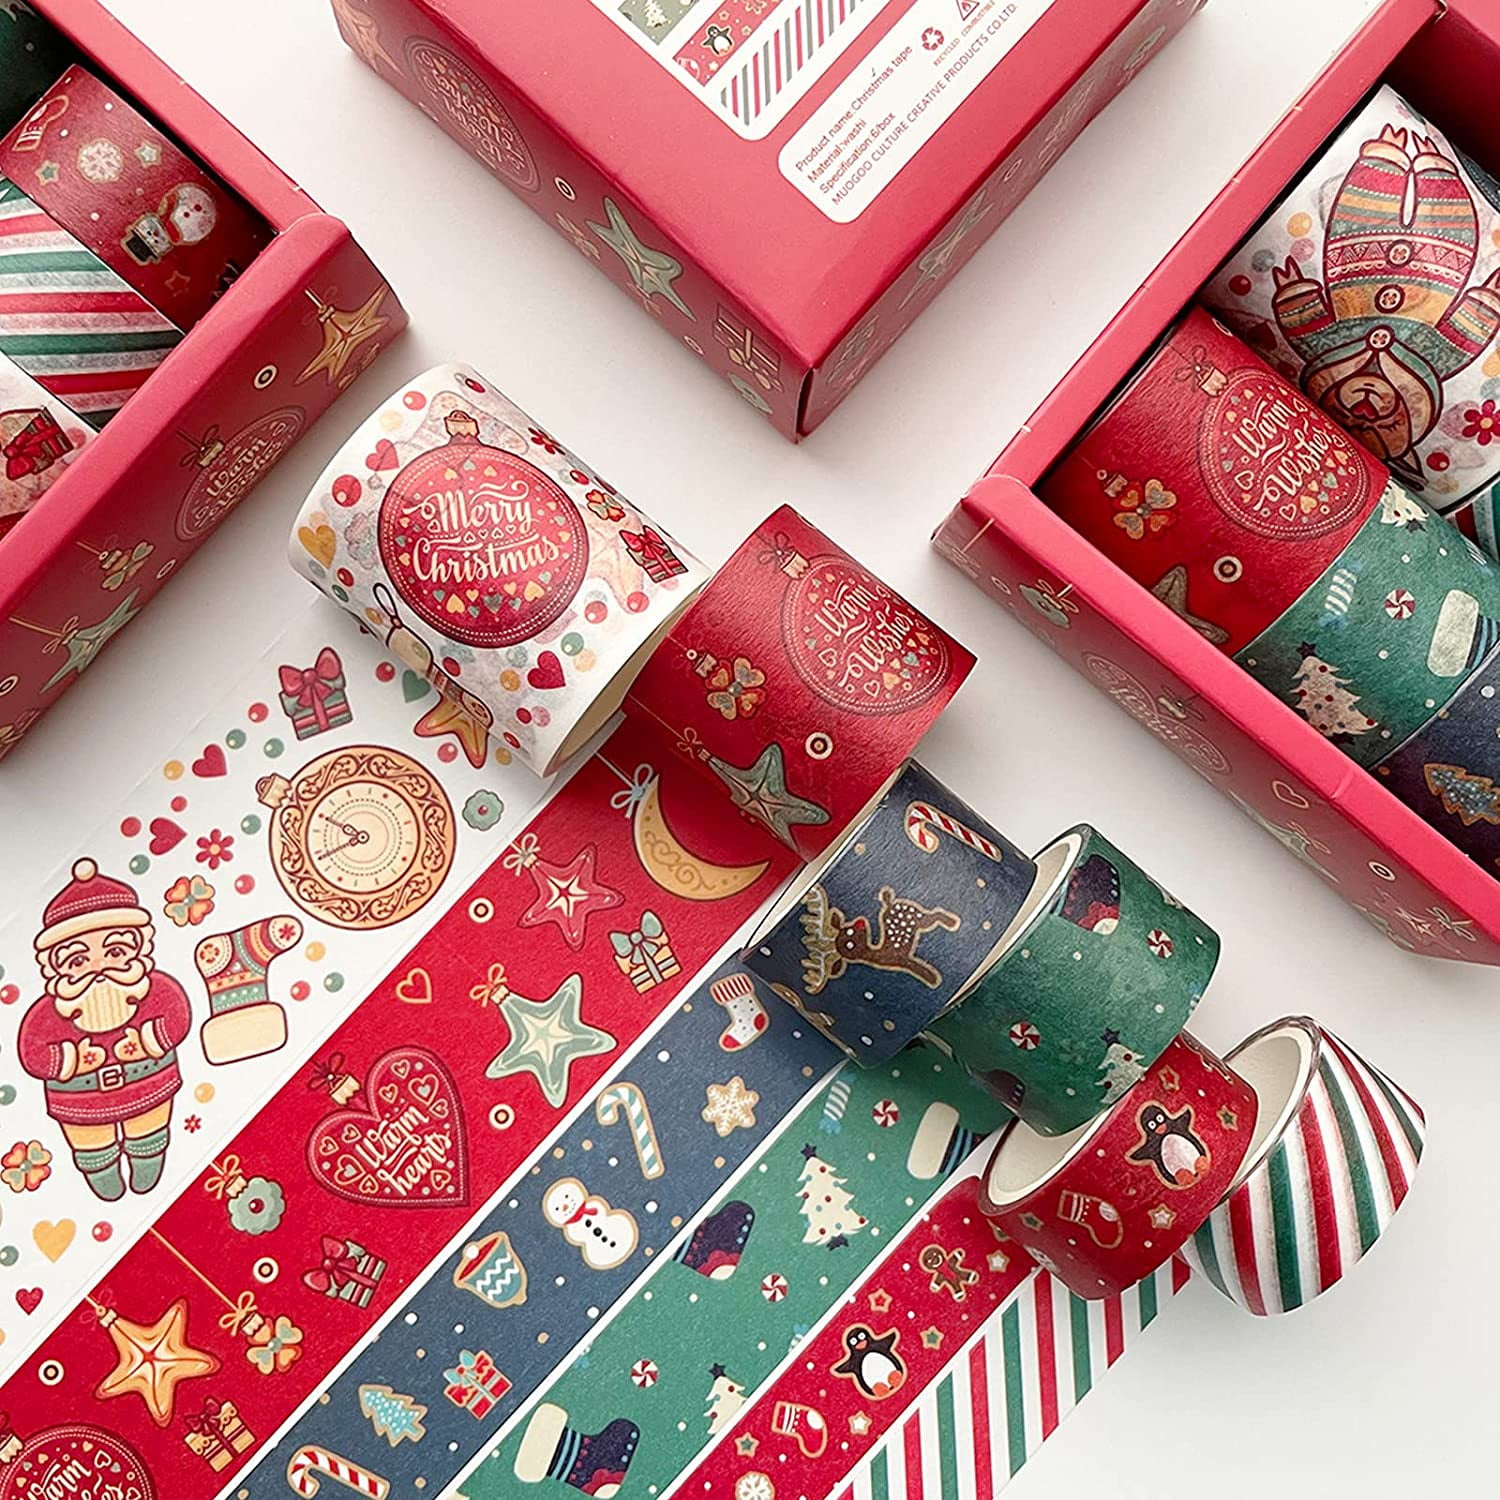 EXCEART 21 Rolls Christmas Washi Tapes Winter Foil Masking Tape Japanese  Paper Holiday Washi Tape for Christmas Scrapbook Journal DIY Craft Gift